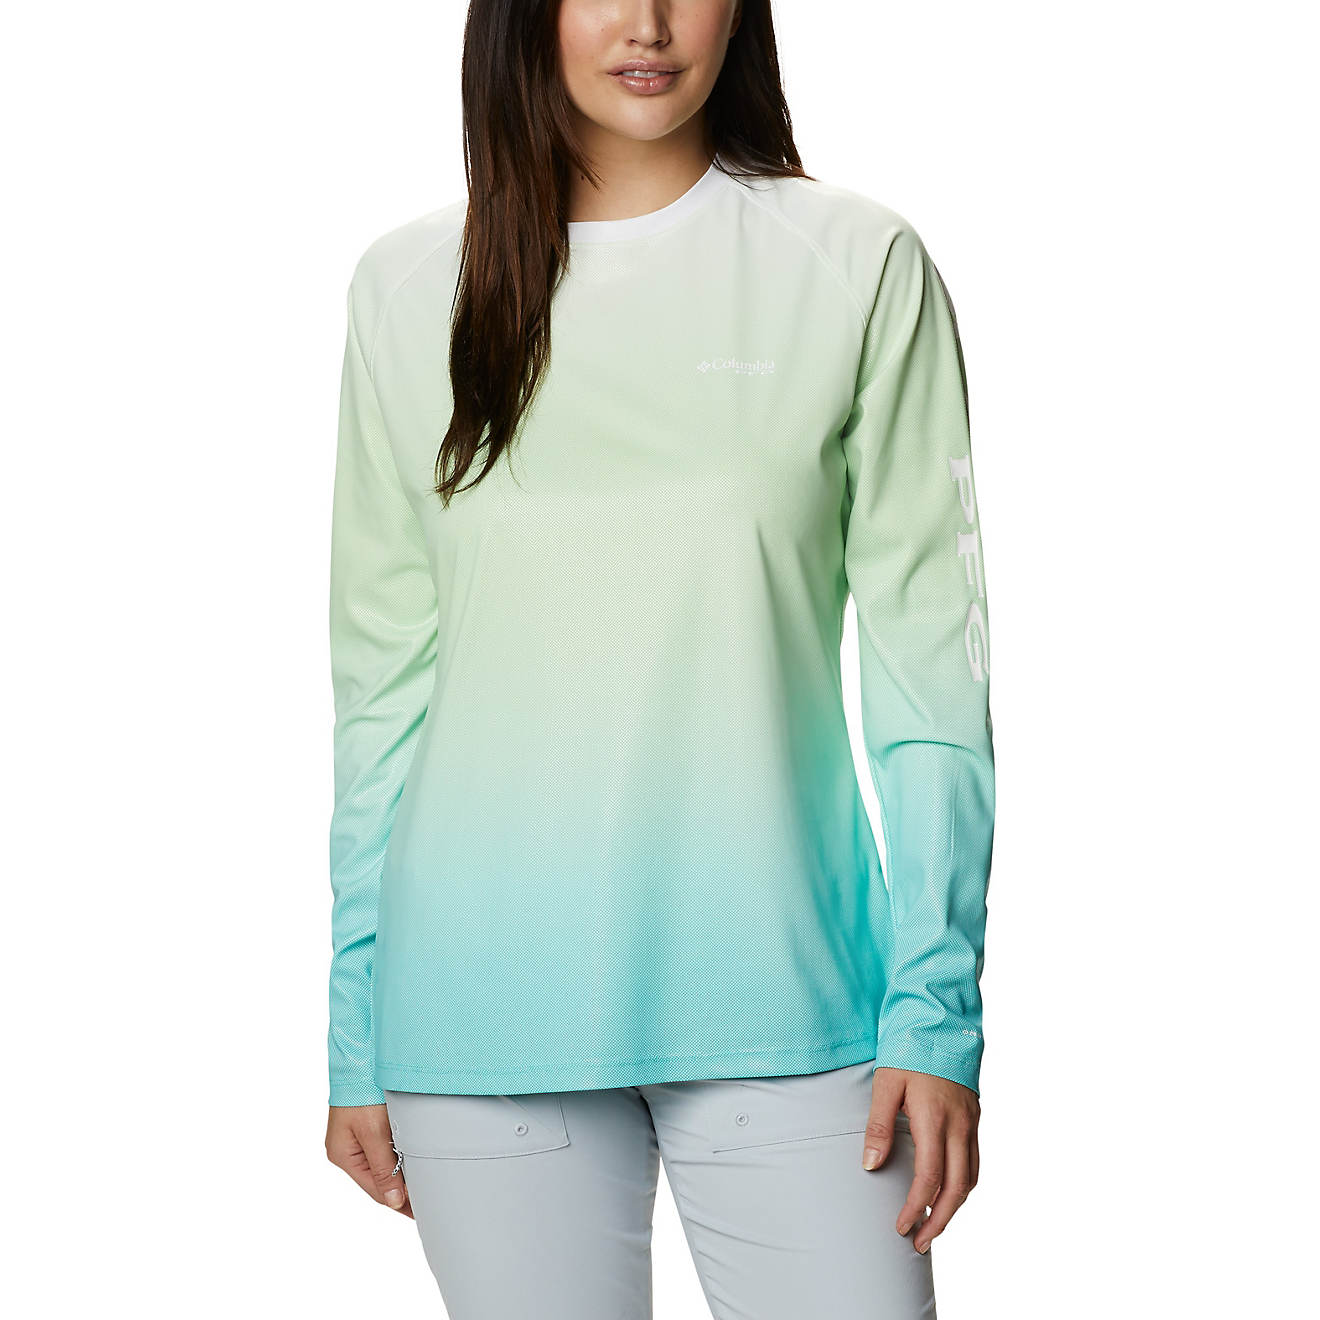 Details about  / BNWT Columbia Sportswear T-Shirt Women/'s Active Fit Scoop Neck Prism Medallion